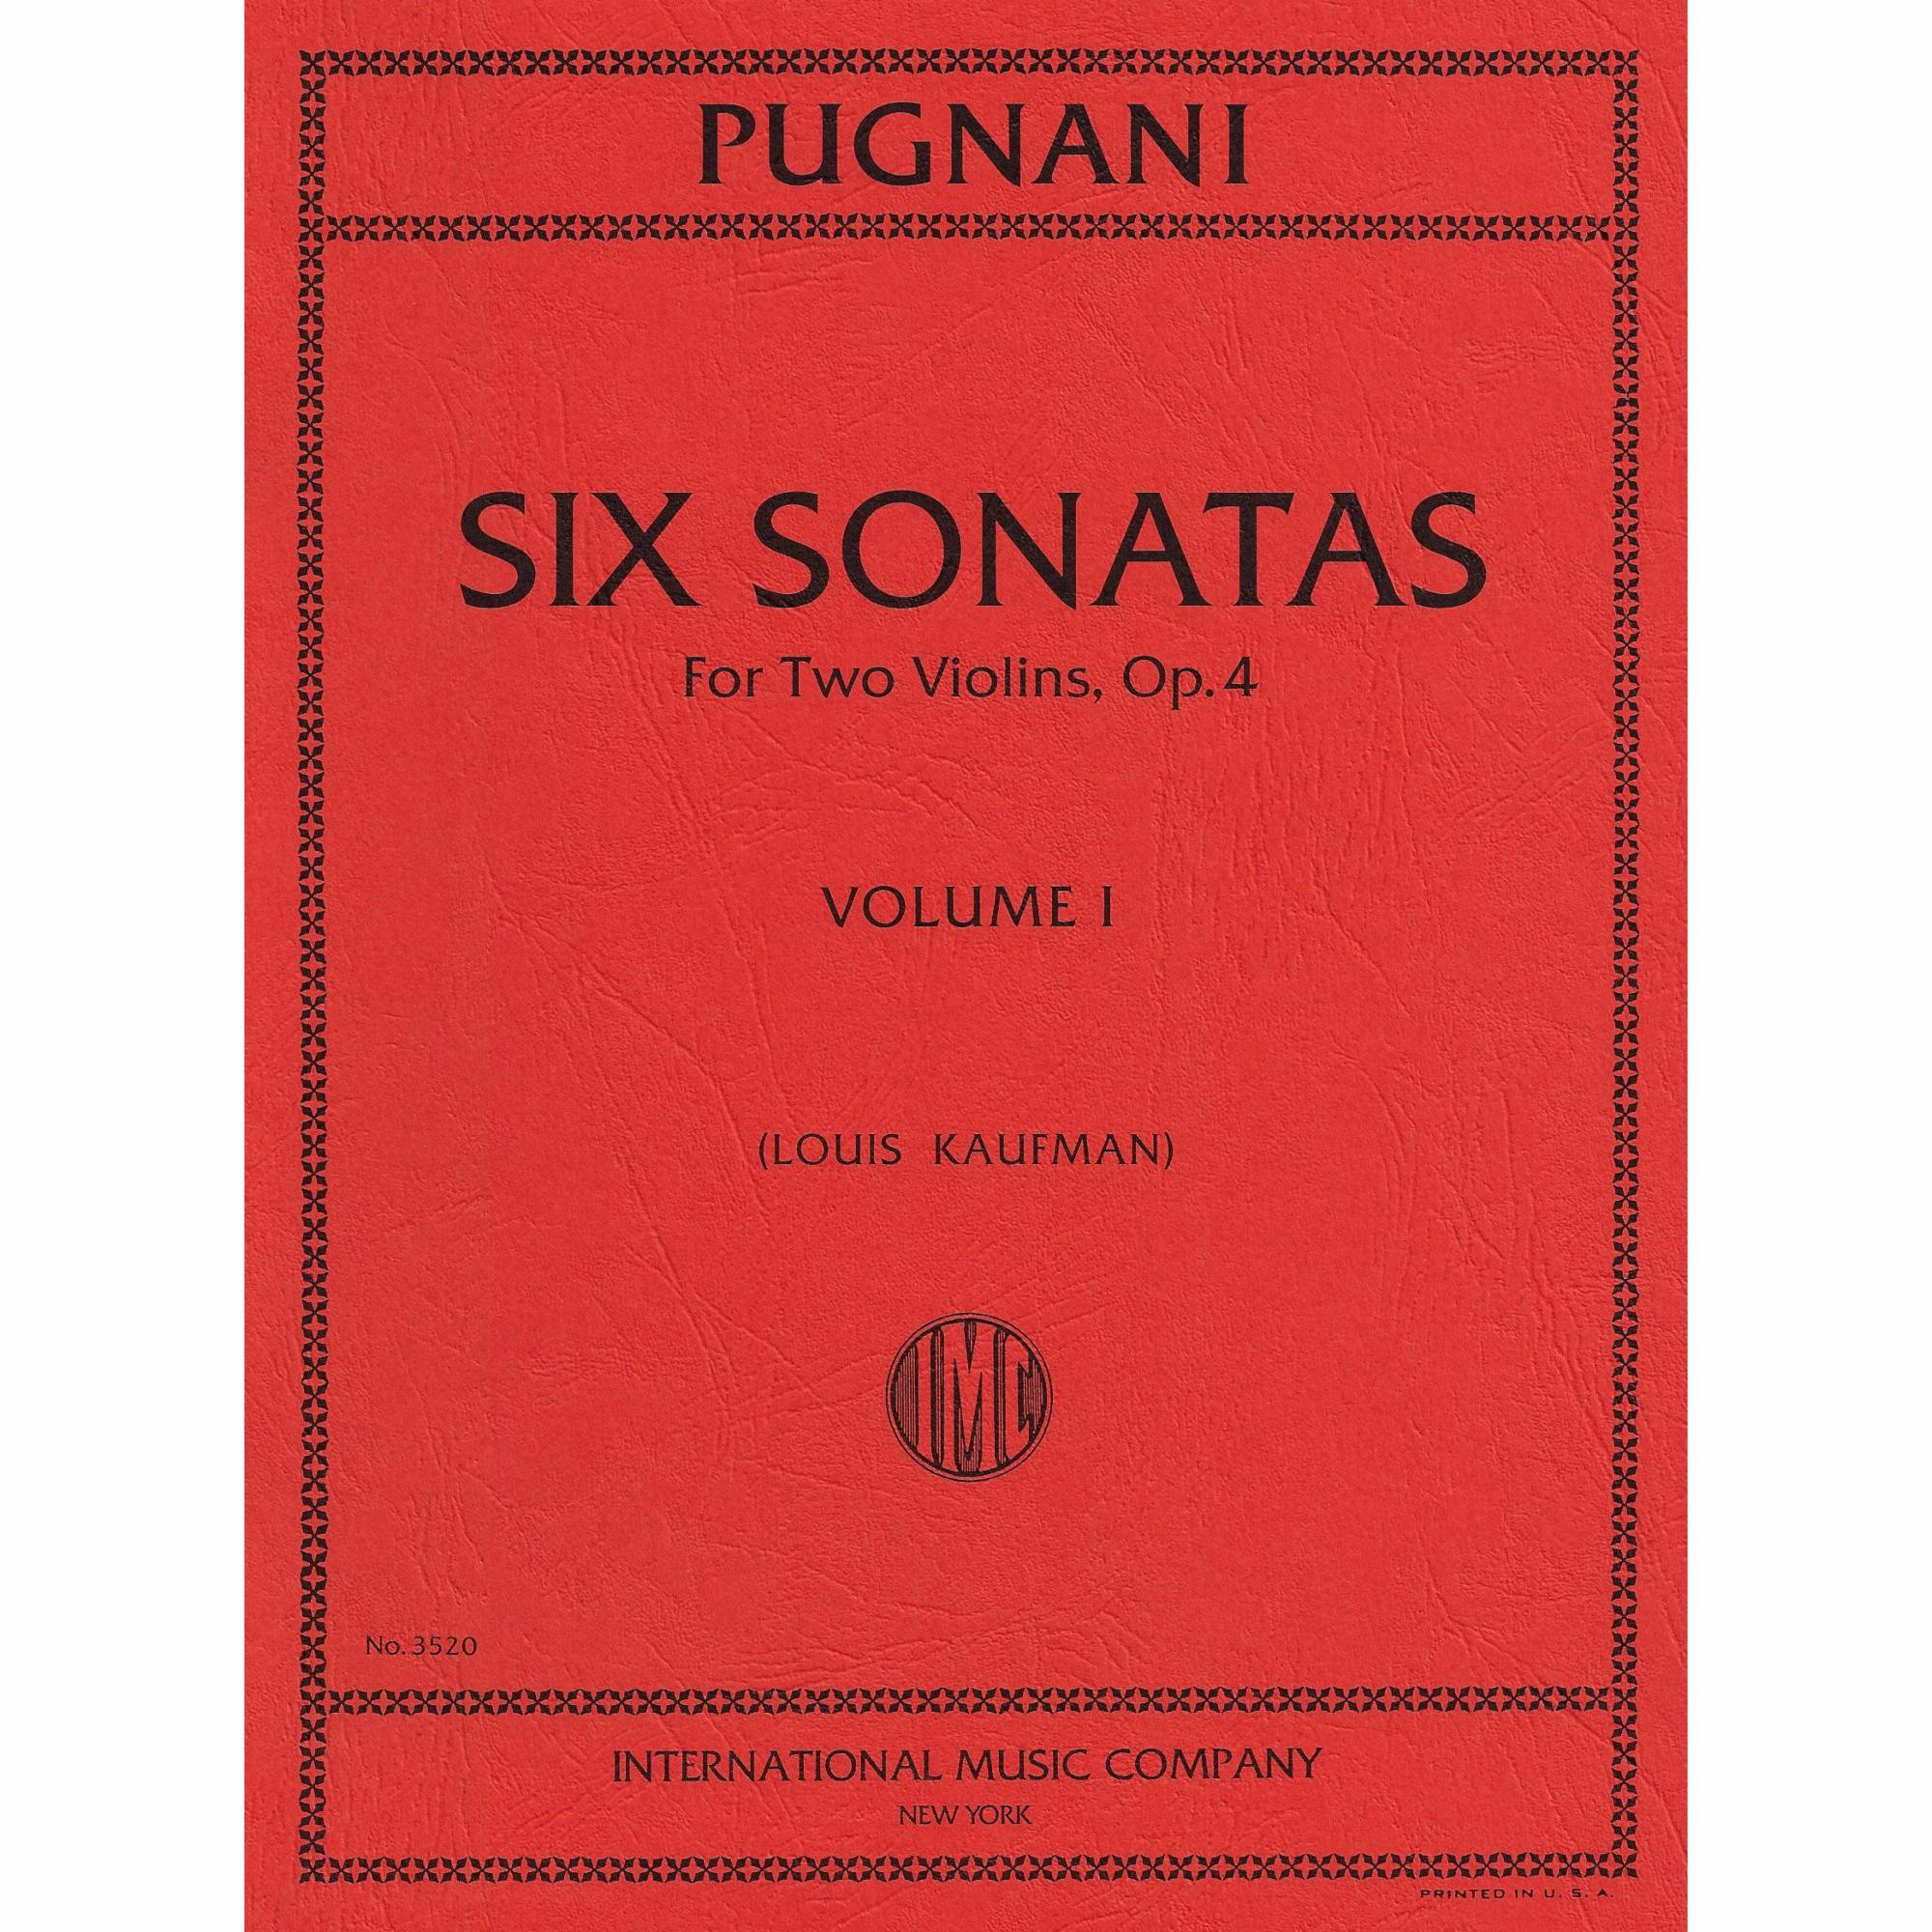 Pugnani -- Six Sonatas, Op. 4 for Two Violins and Piano